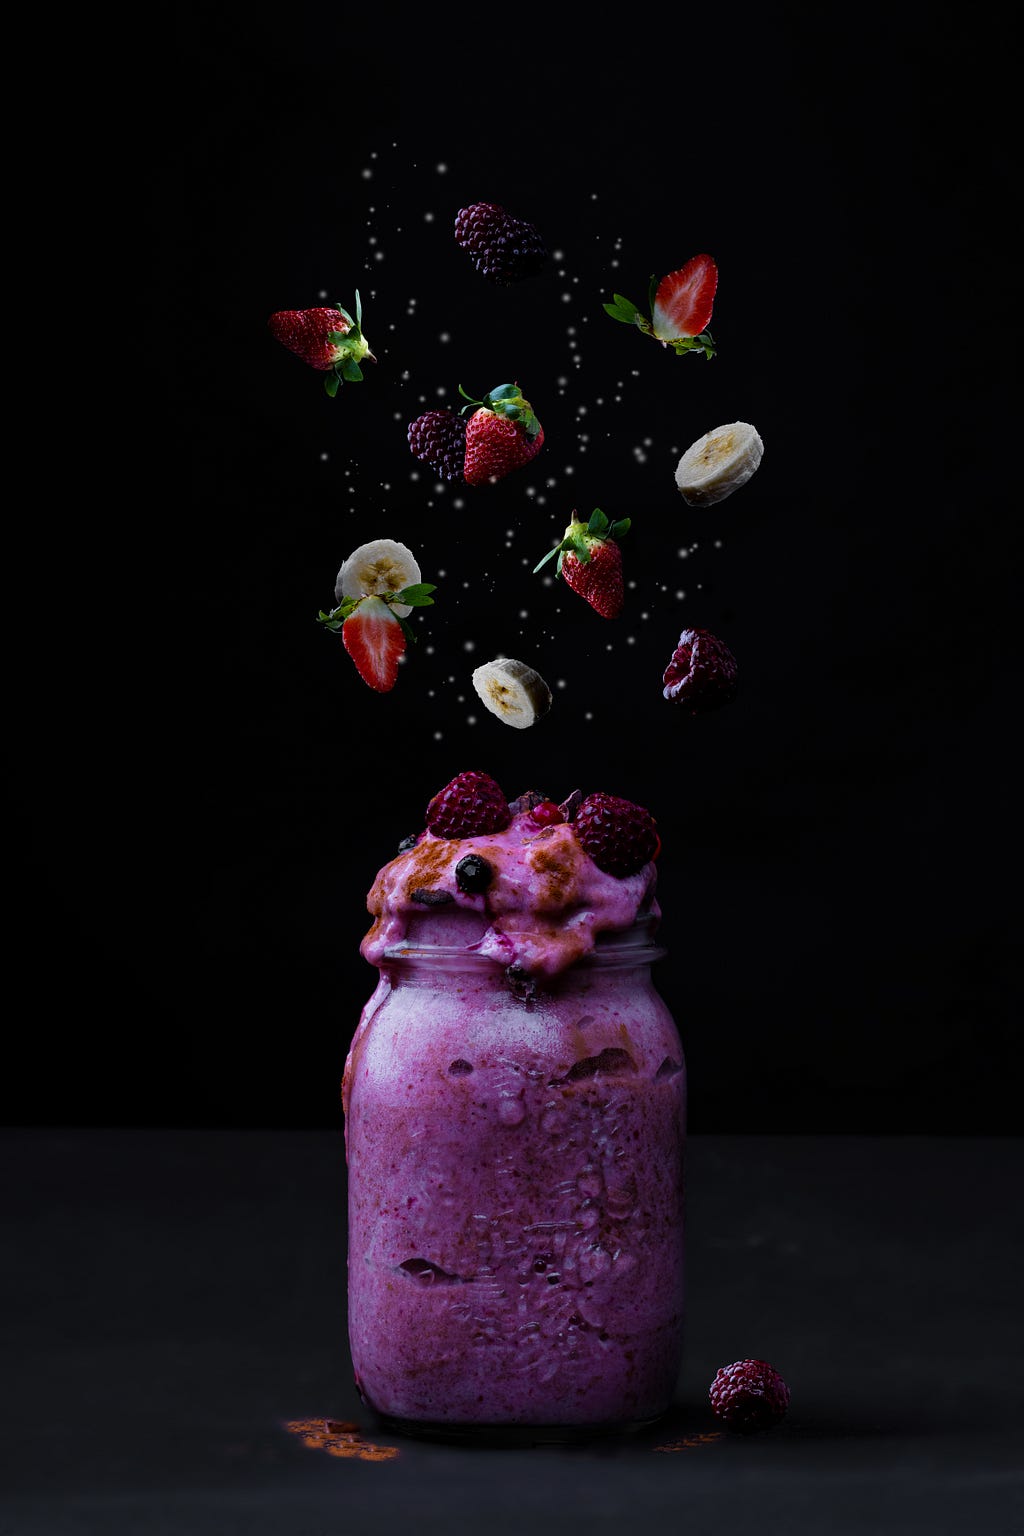 A purple-colored smoothie with bits of fruits